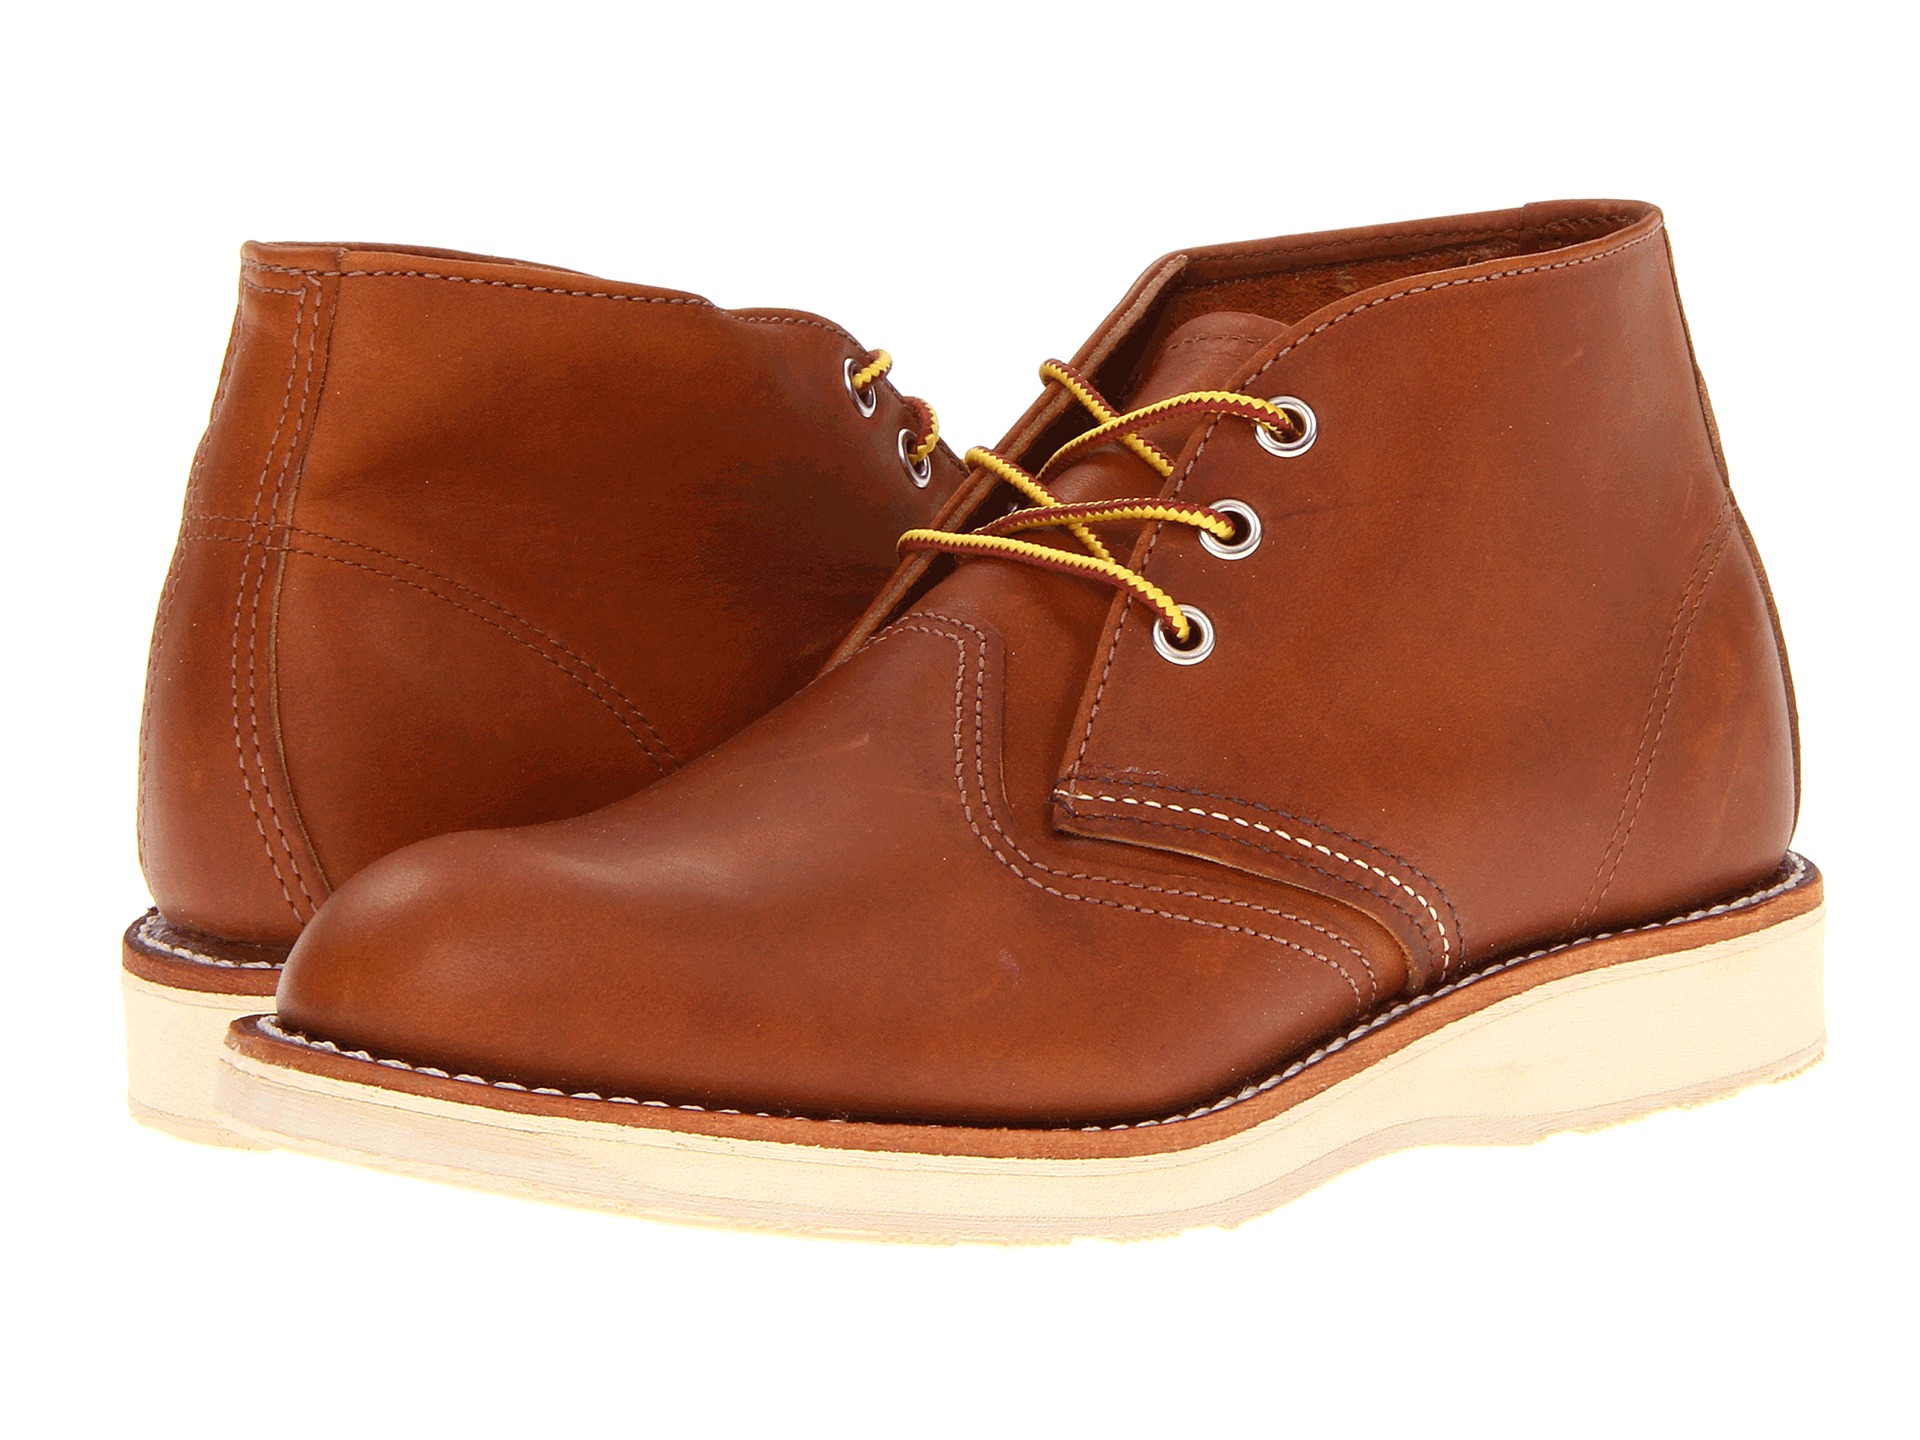 Red Wing Heritage Work Chukka at Zappos.com